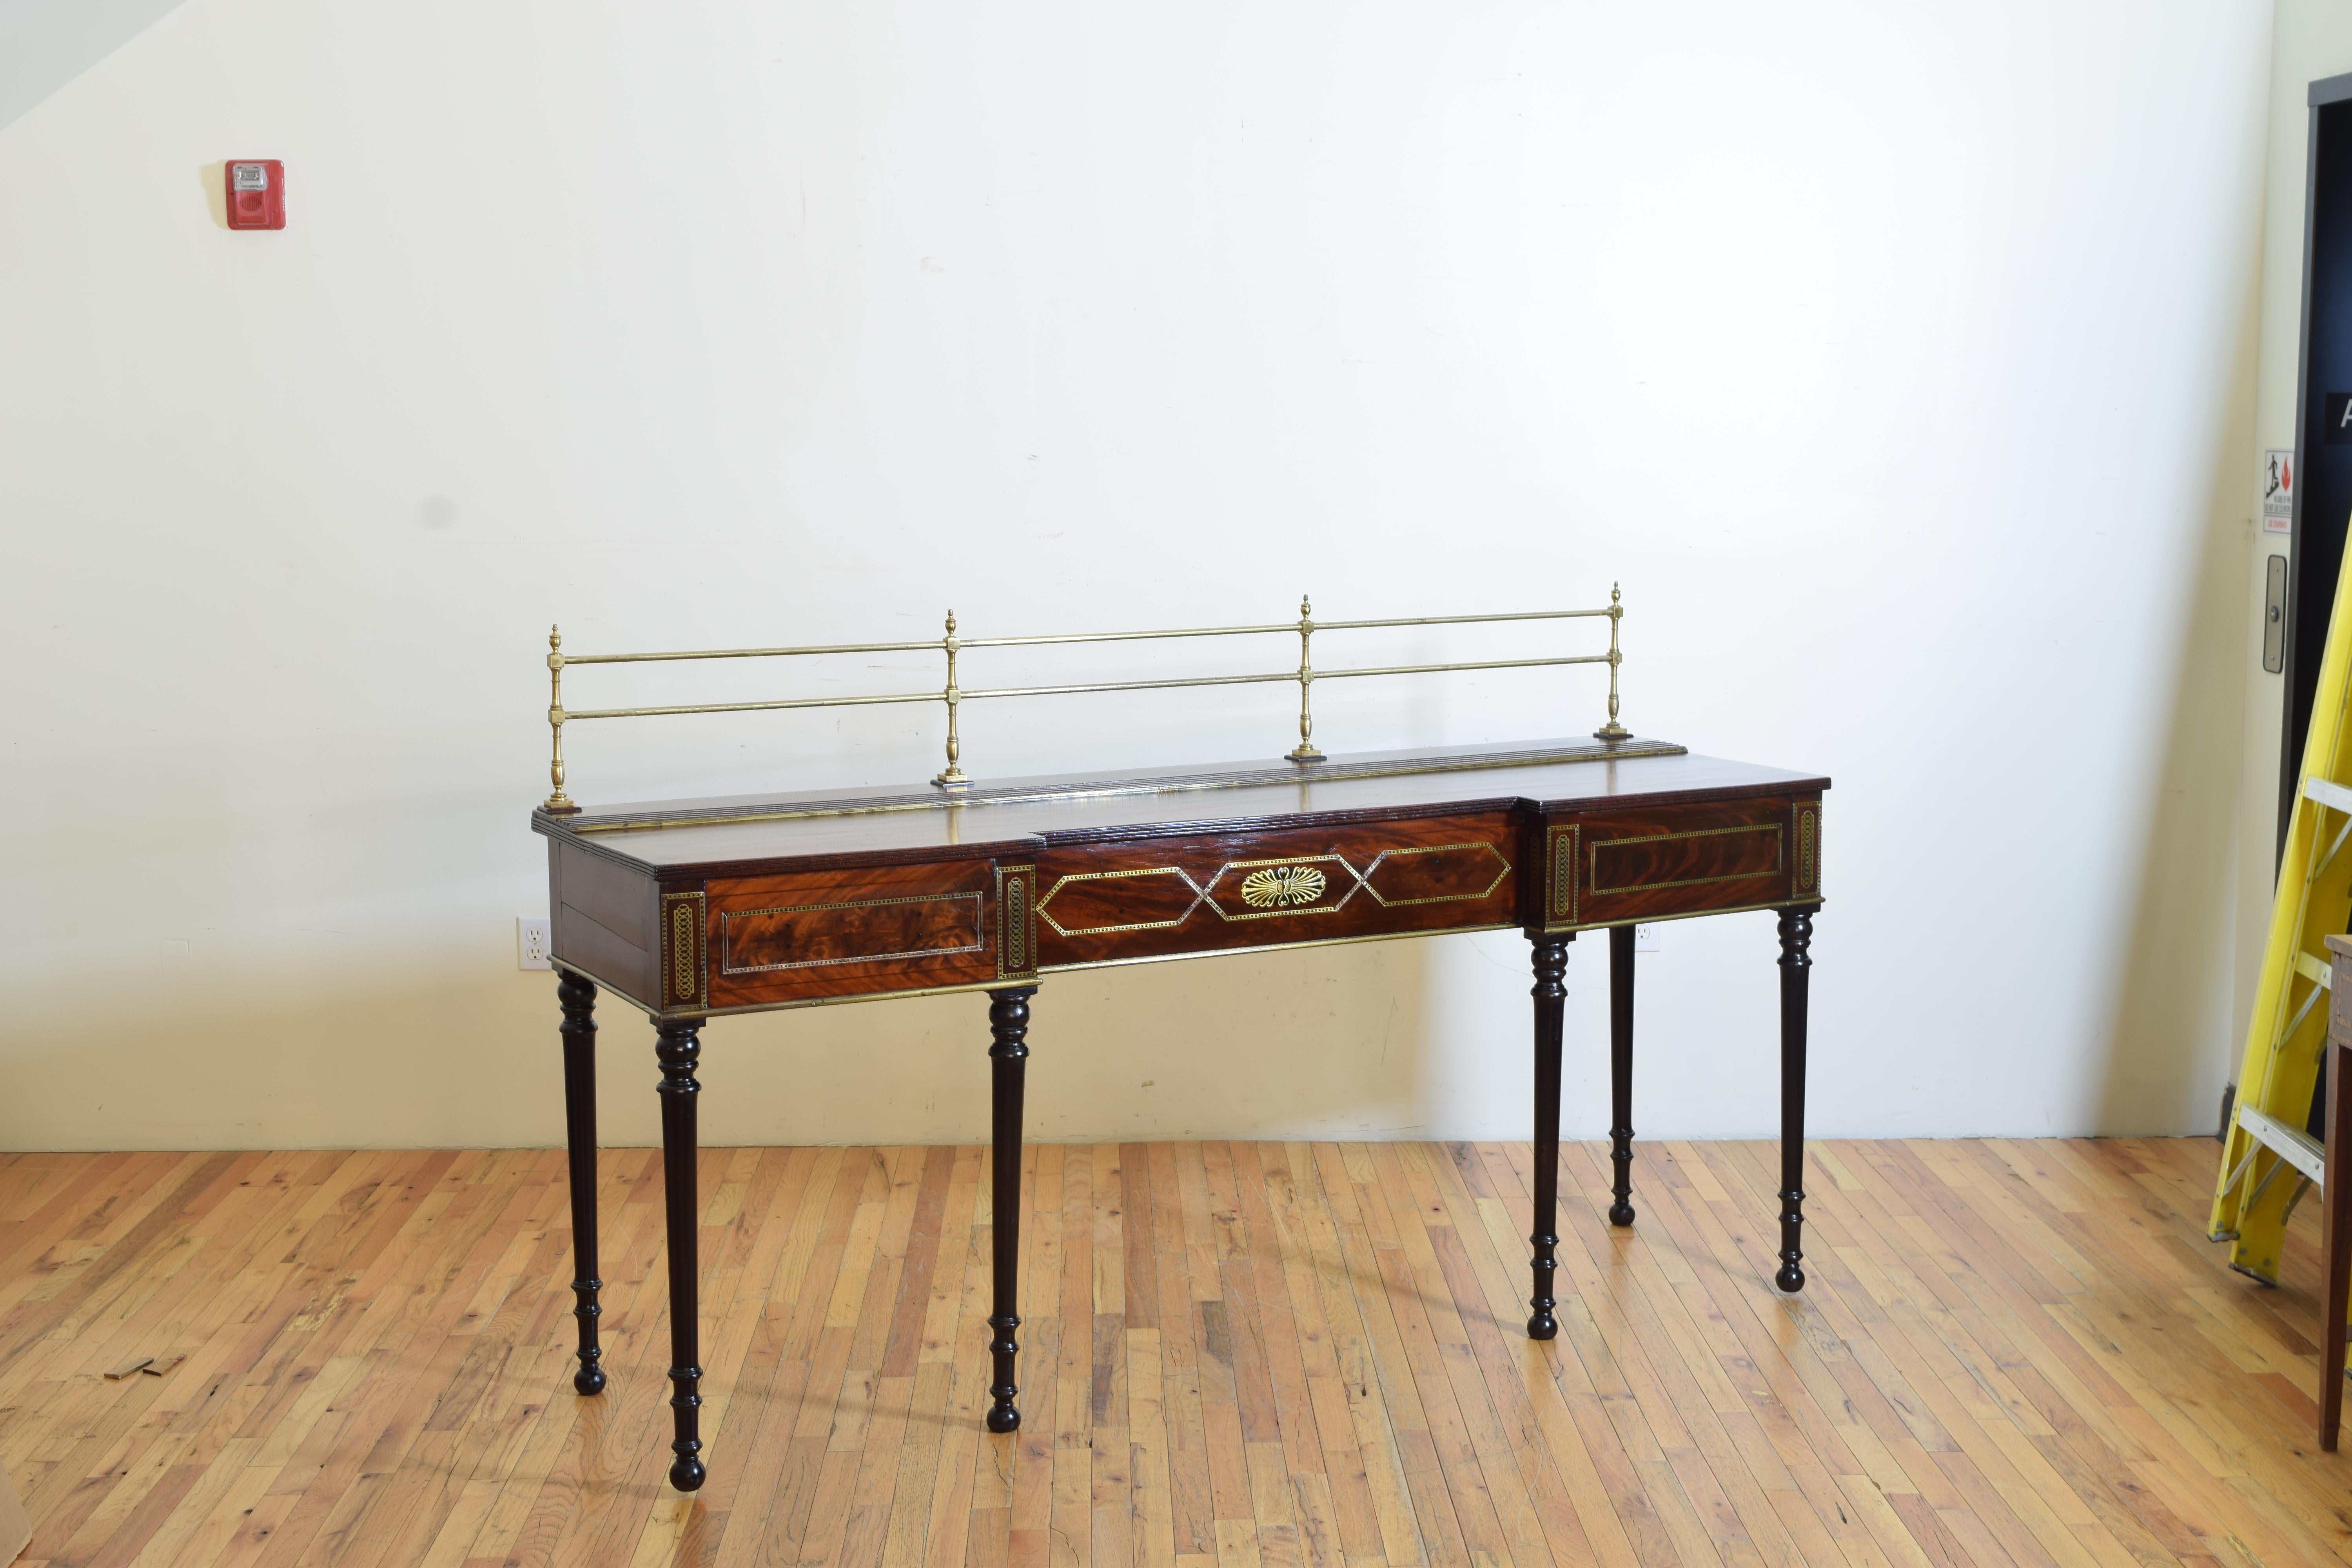 British or possibly Irish, first quarter of the 19th century, Regency period mahogany server or sideboard having a brass gallery rail, recessed center and geometric brass inlay, rising on turned ebonized legs.

Height of server itself is 36.25